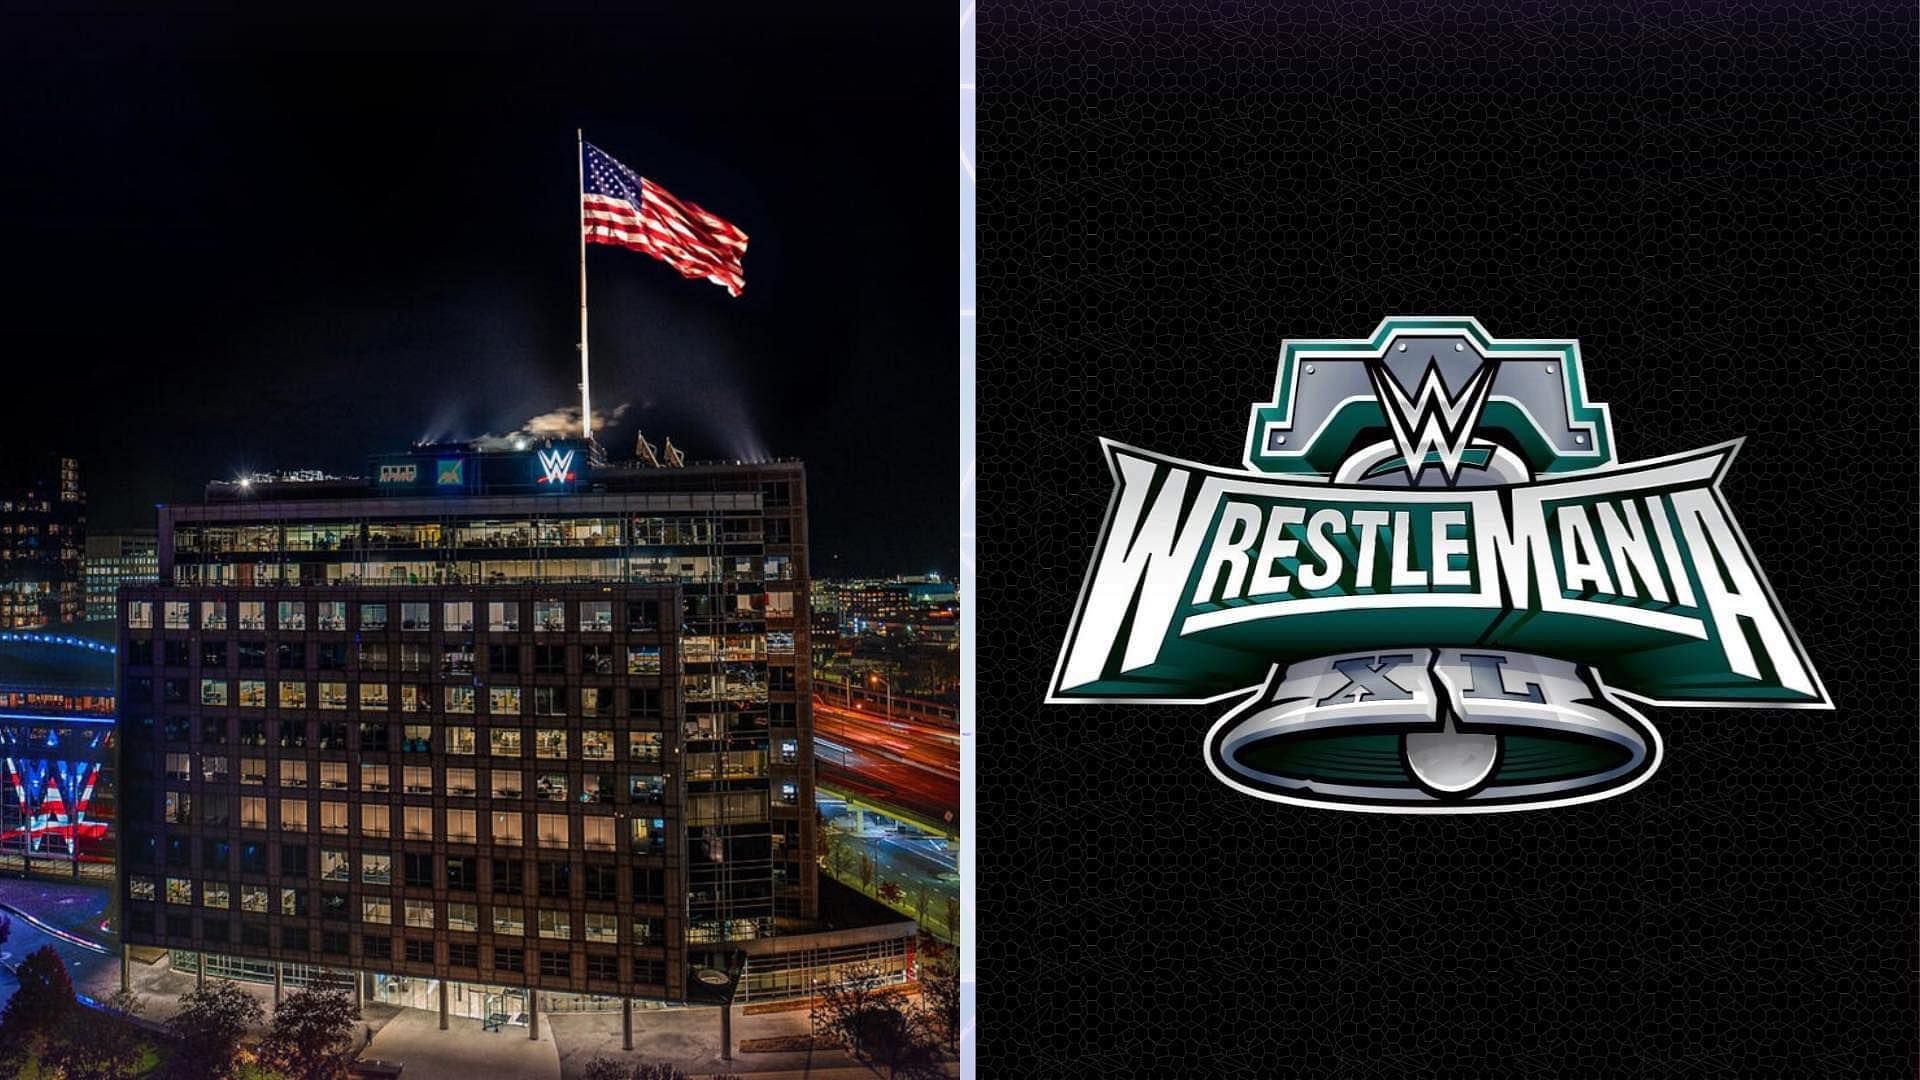 Wrestlemania 40 is set to take place at Lincoln Financial Field in Philadelphia